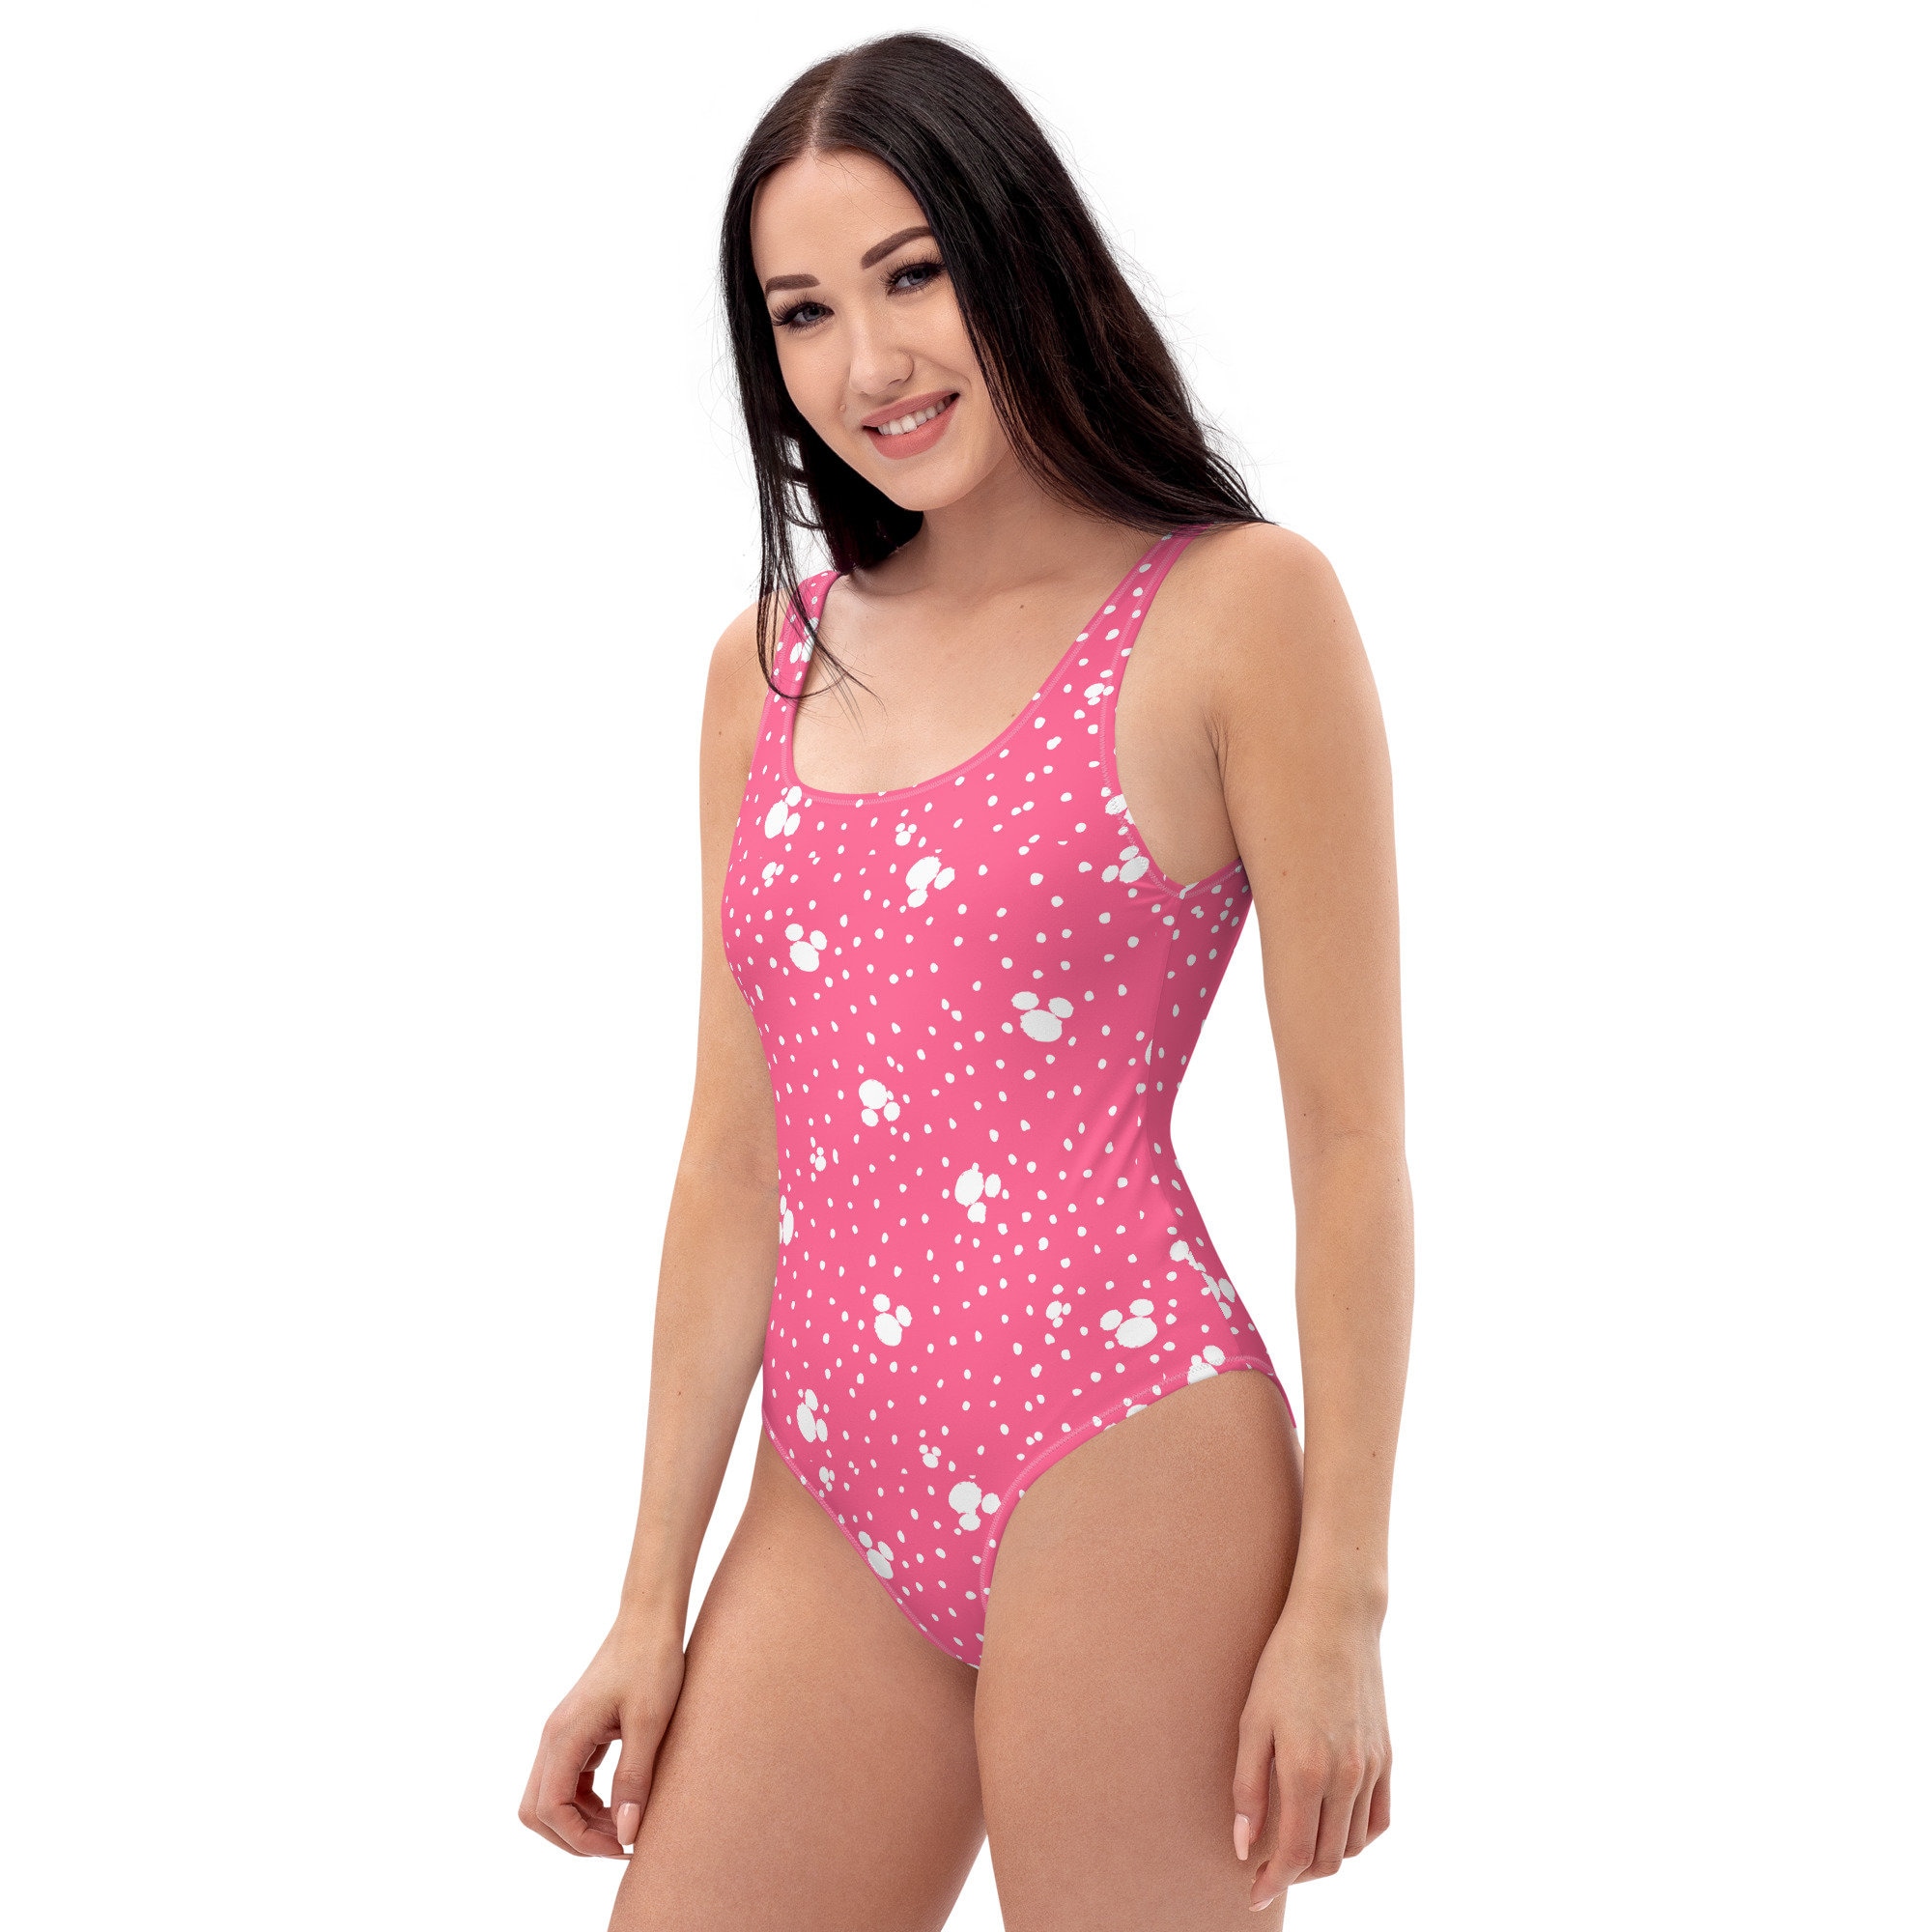 Pink Polka Dot Women's One-Piece Swimsuit, Disney Vacation outfit